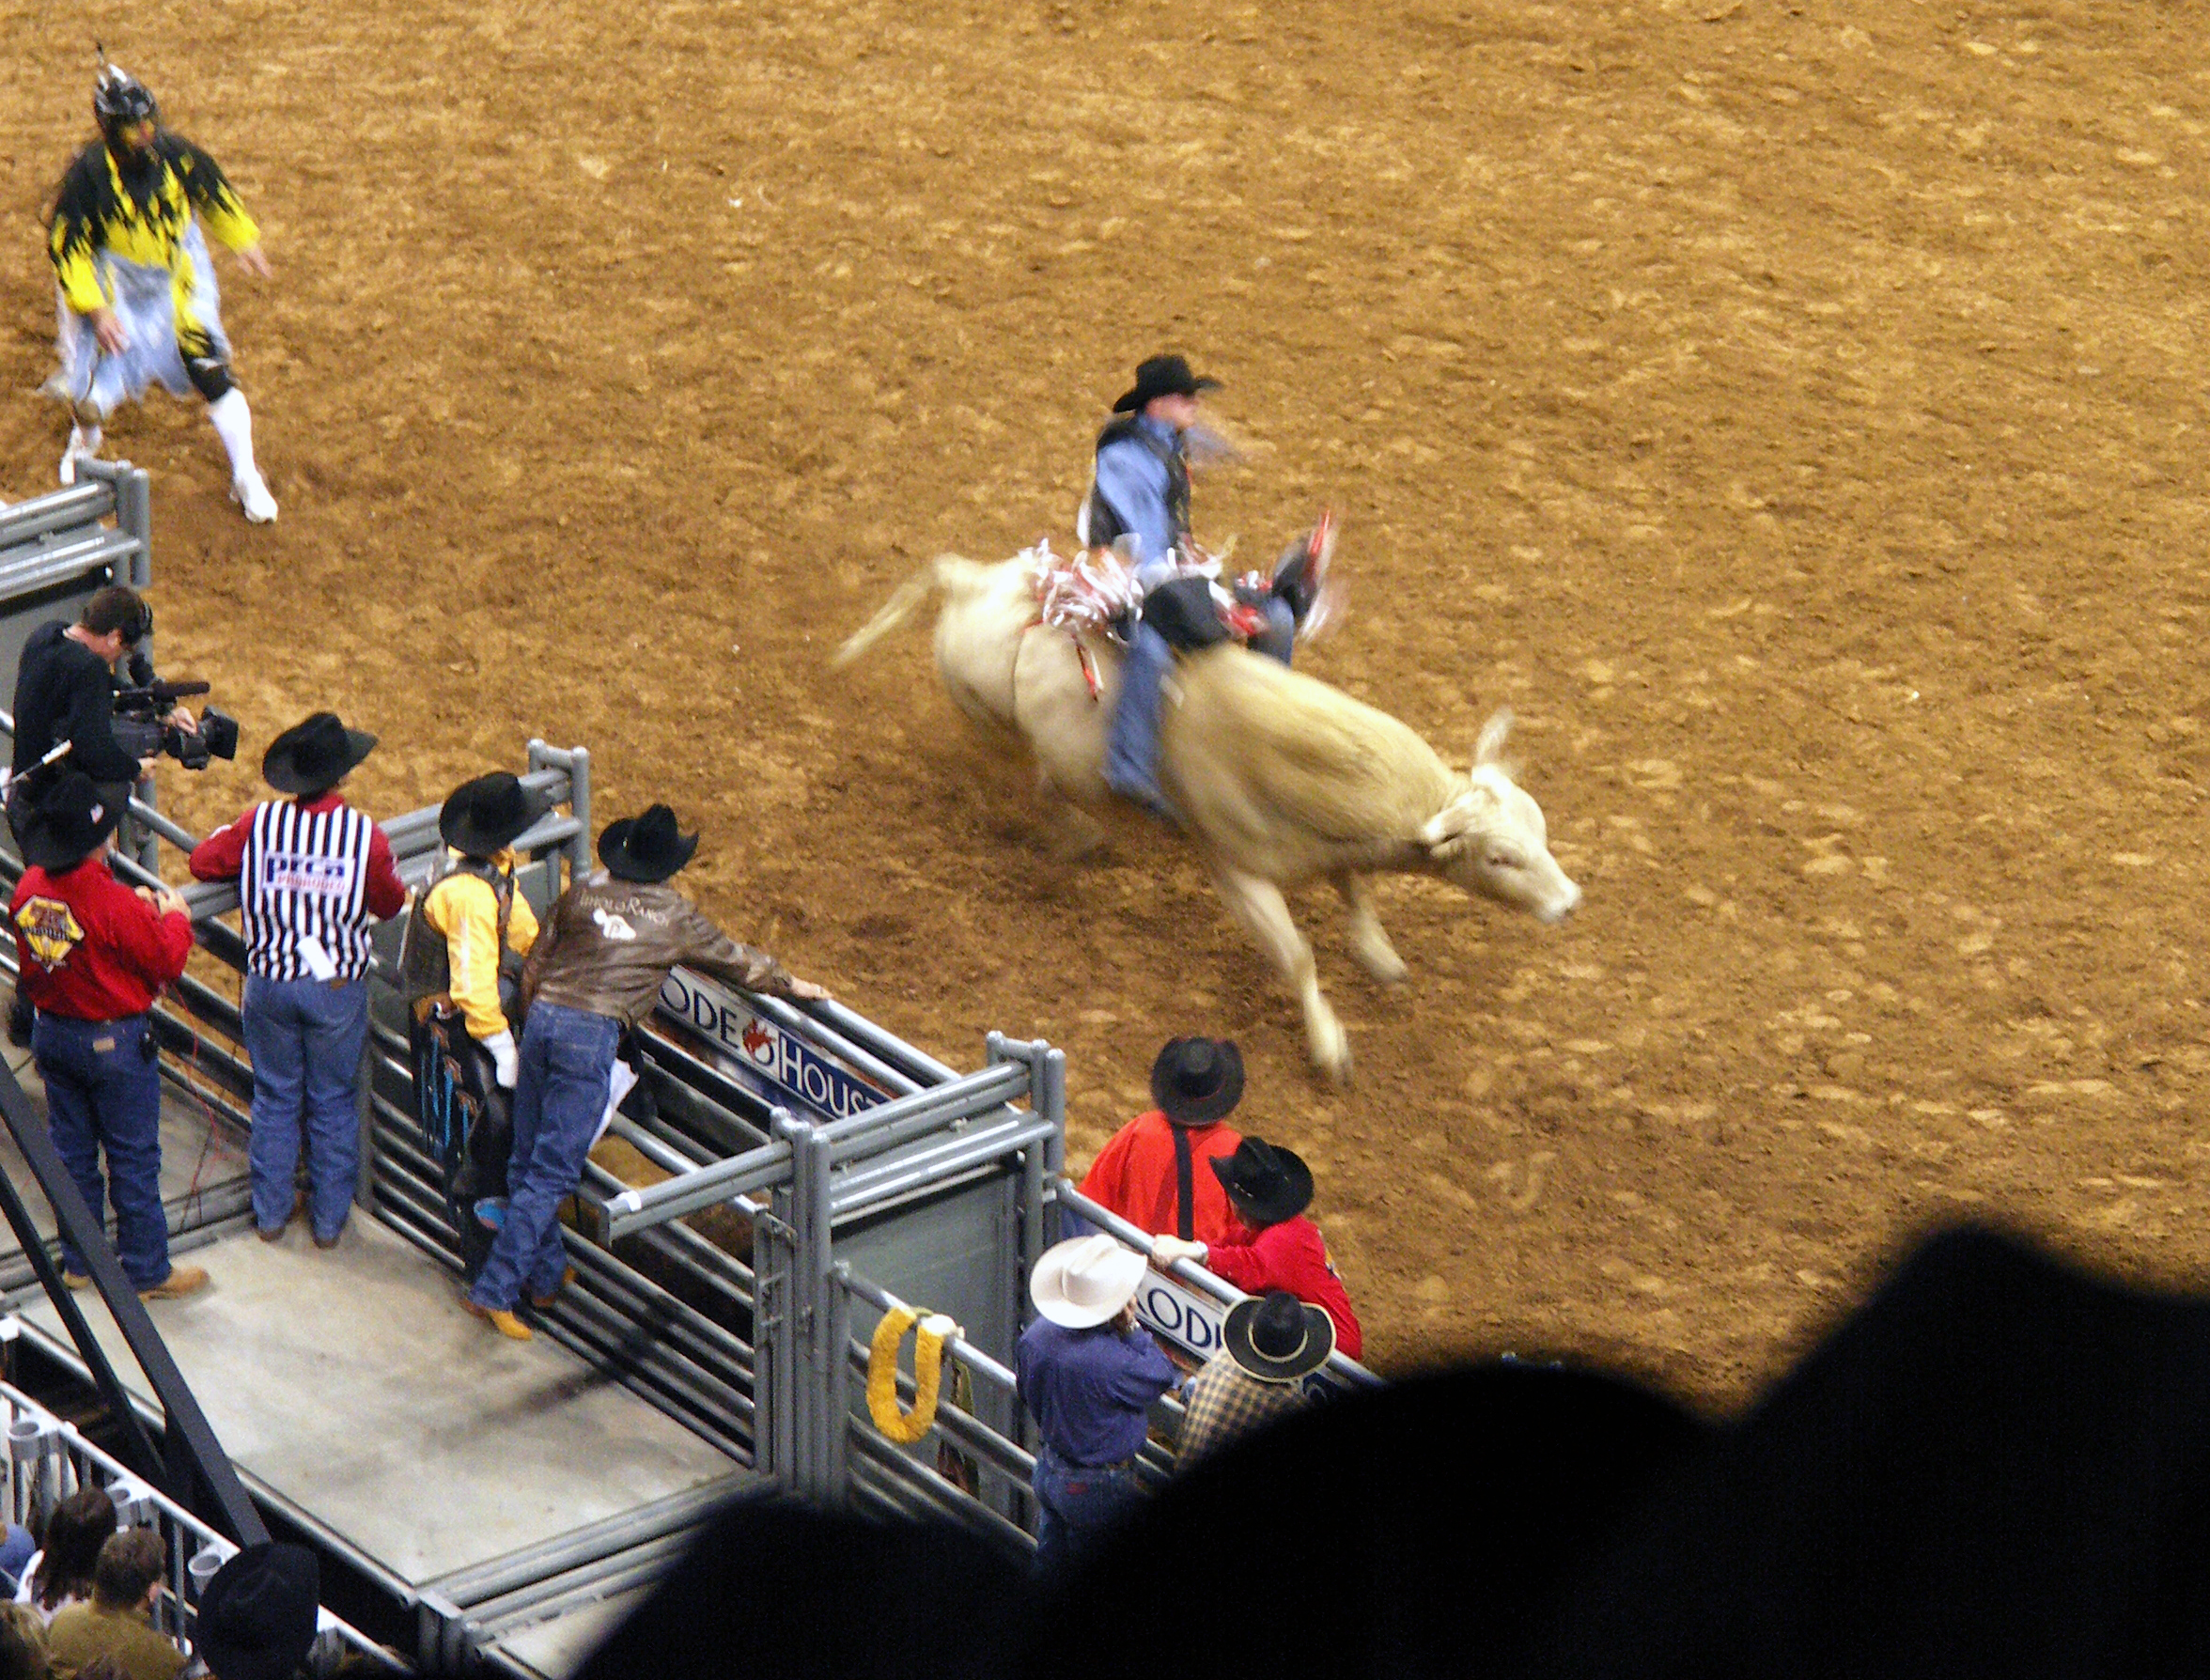 Houston Livestock Sow and Rodeo, Texas